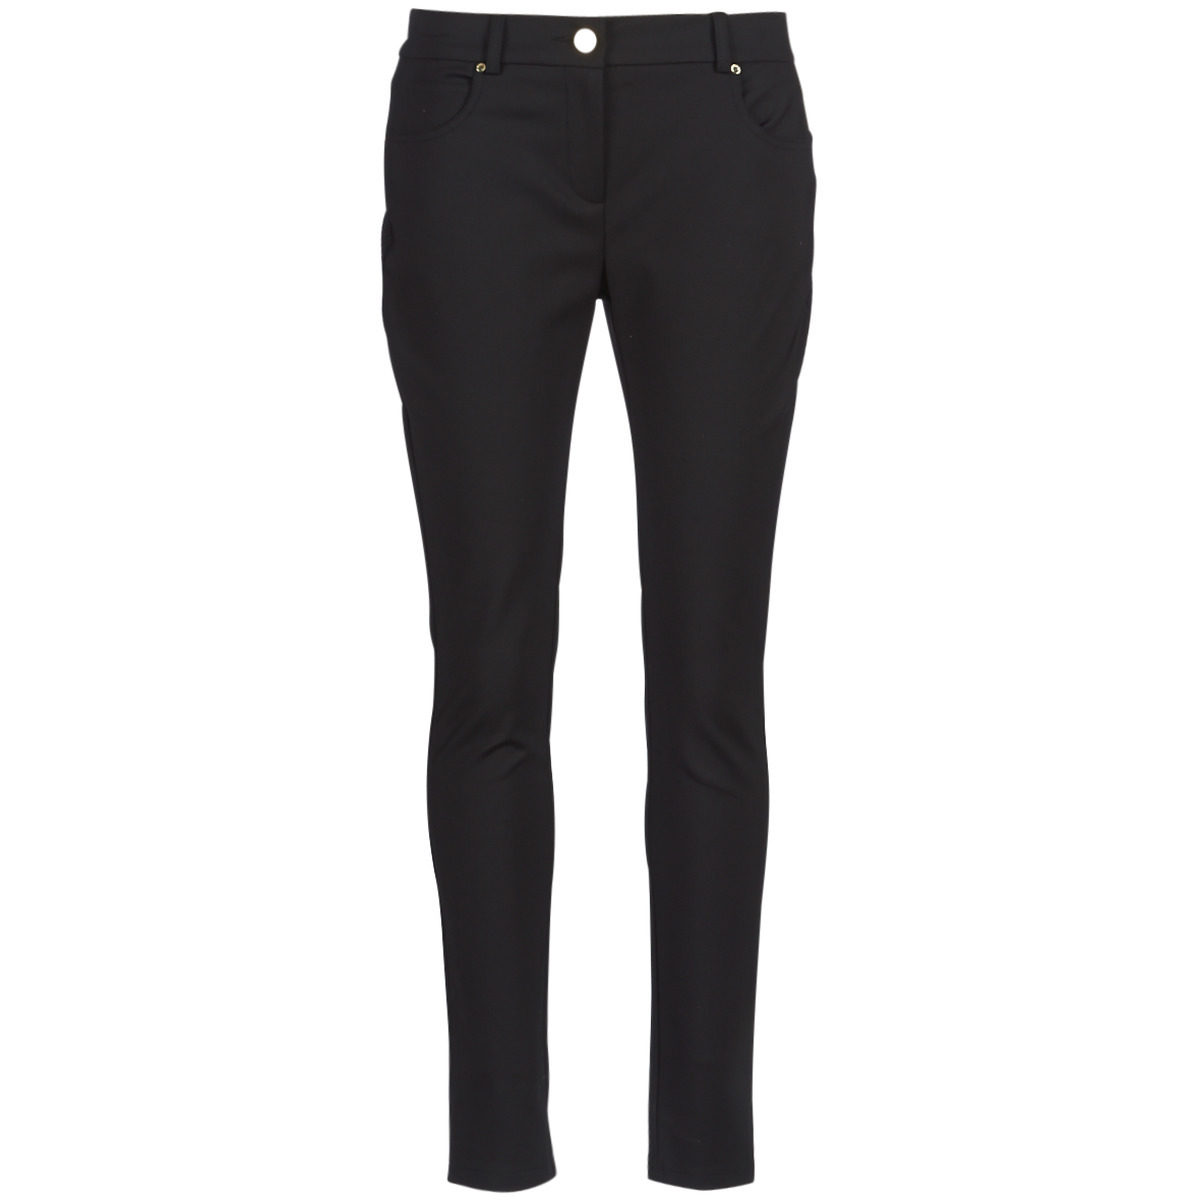 Marciano - Women's Black Trousers by Spartoo GOOFASH